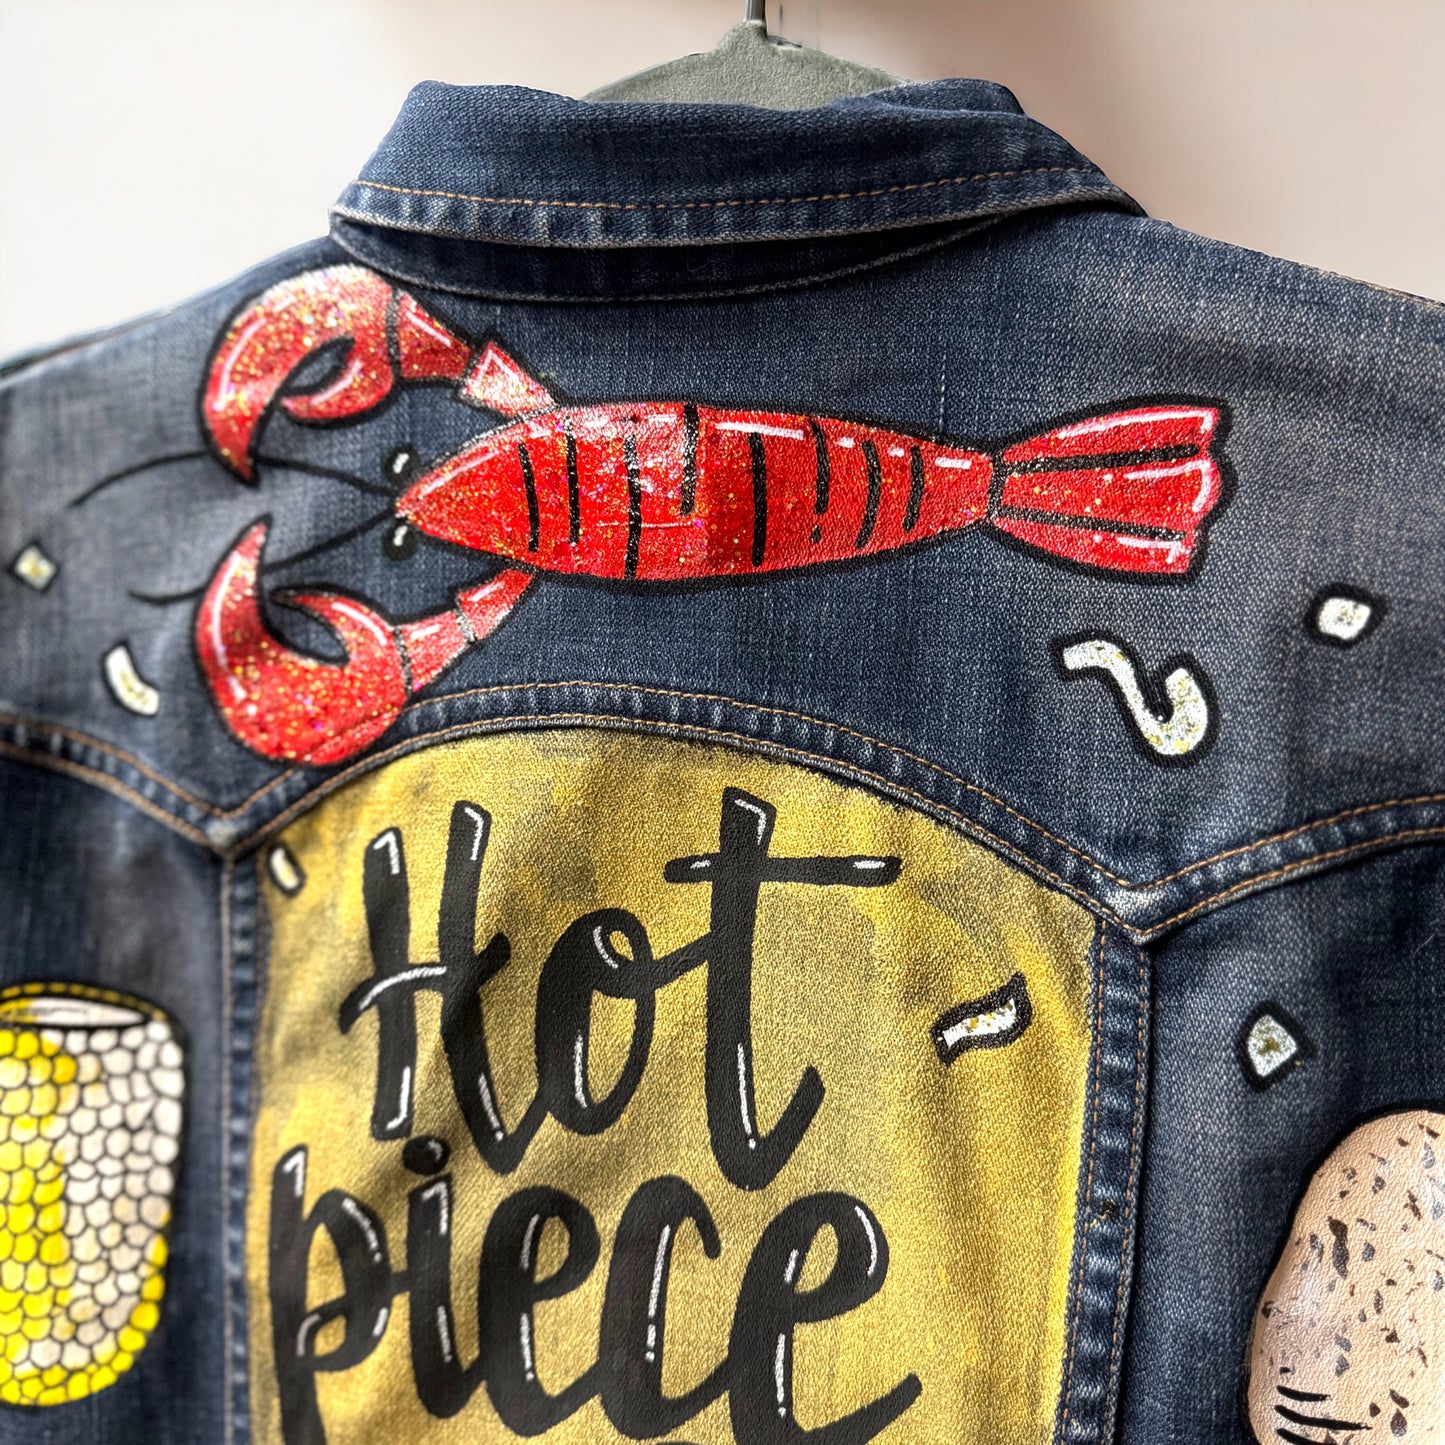 Hand Painted Jean Jacket: “Hot Piece of Tail”  - Cajun Jacket, Crawfish, Mardi Gras, Mardi Gras Jacket, New Orleans, Purple Green Gold, Mardi Gras, Parade Outfit